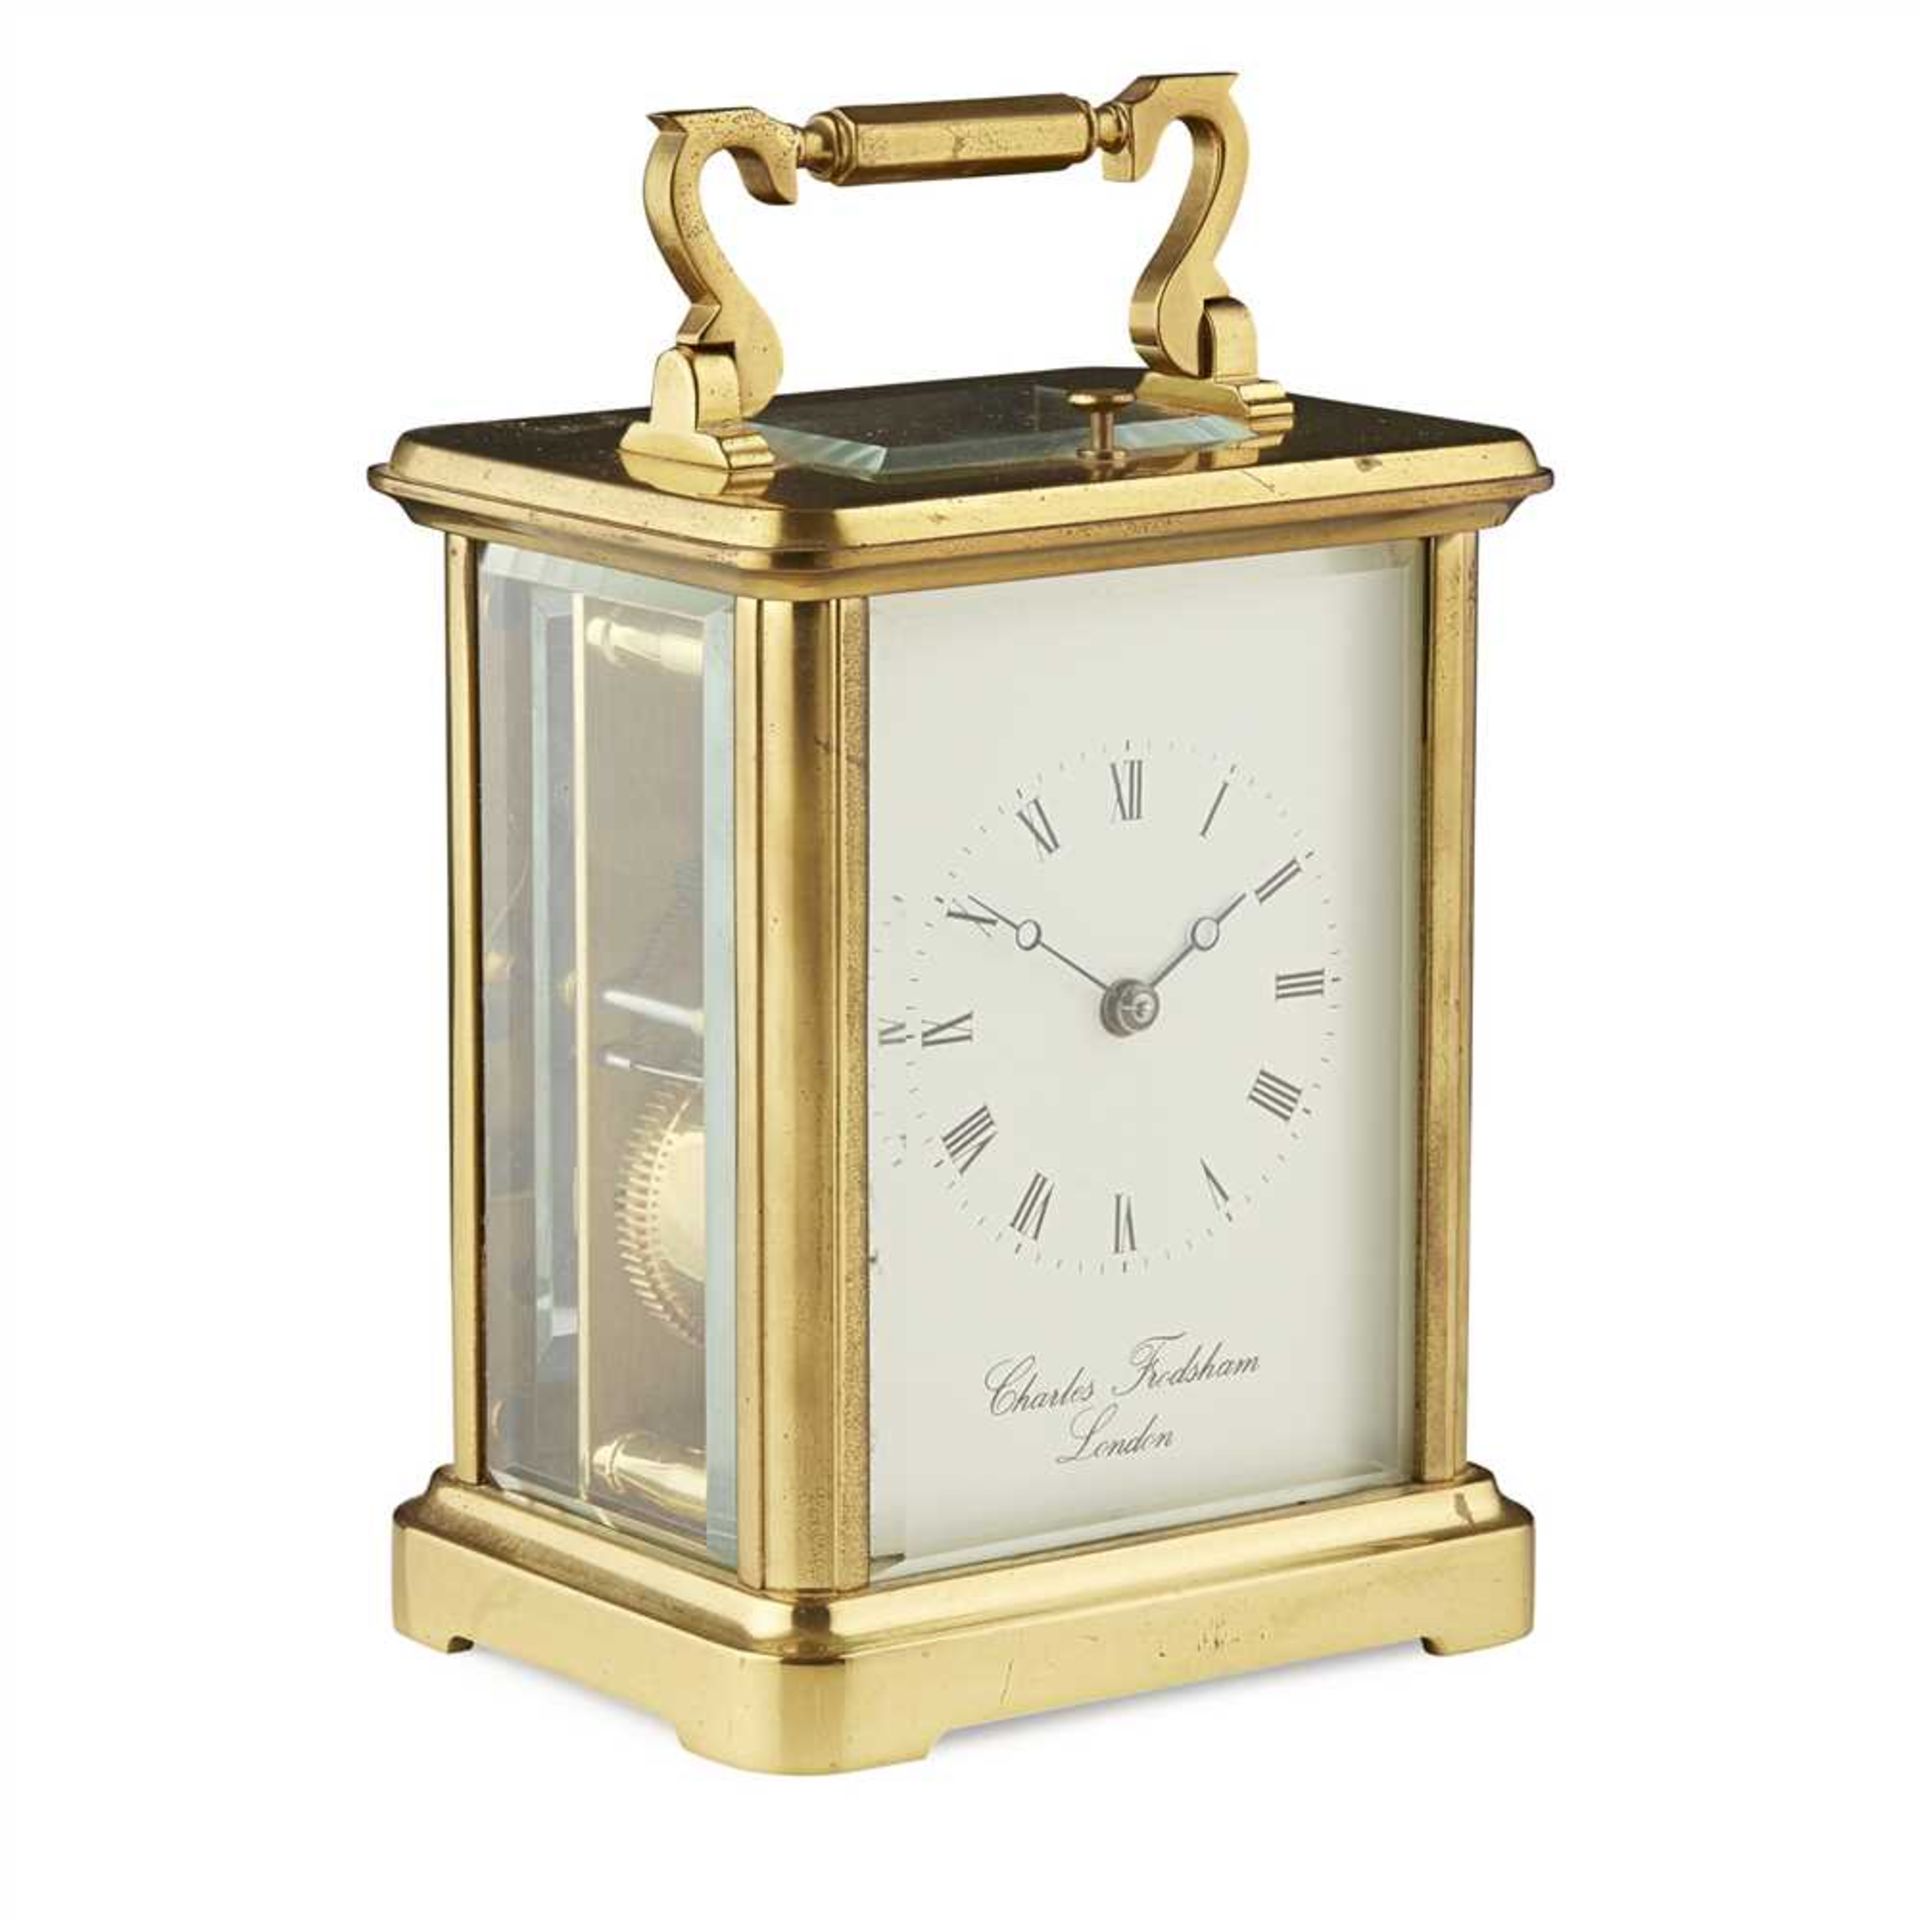 GILT BRASS REPEATING CARRIAGE CLOCK, CHARLES FRODSHAM, LONDON 20TH CENTURY